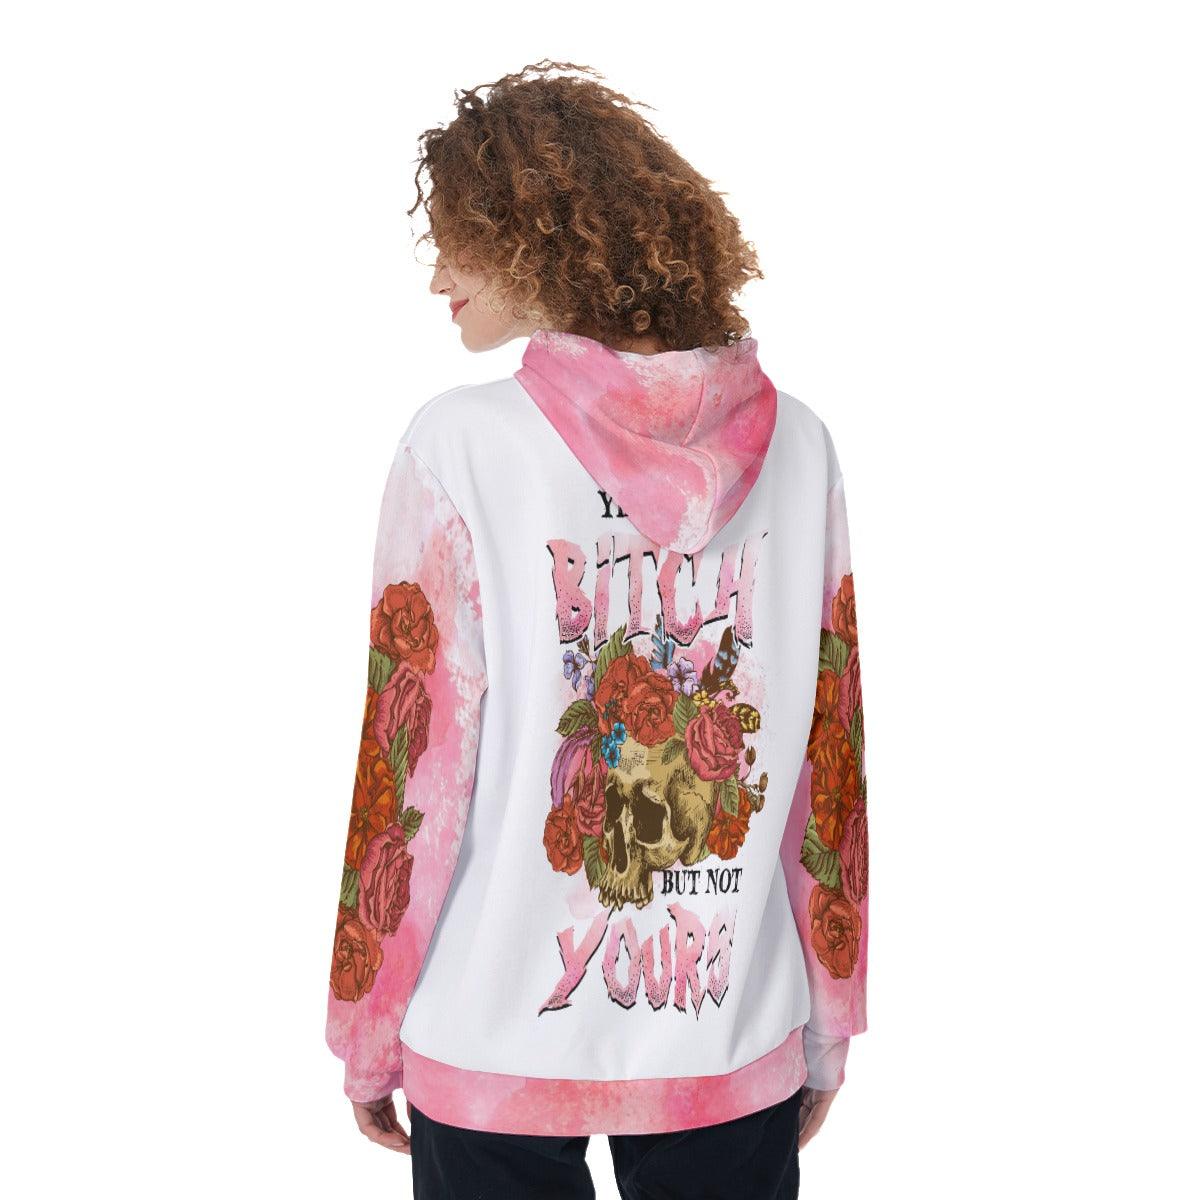 Flower Skull Yes I'm A Bitch But Not Yours Funny Hoodie For Women - Wonder Skull